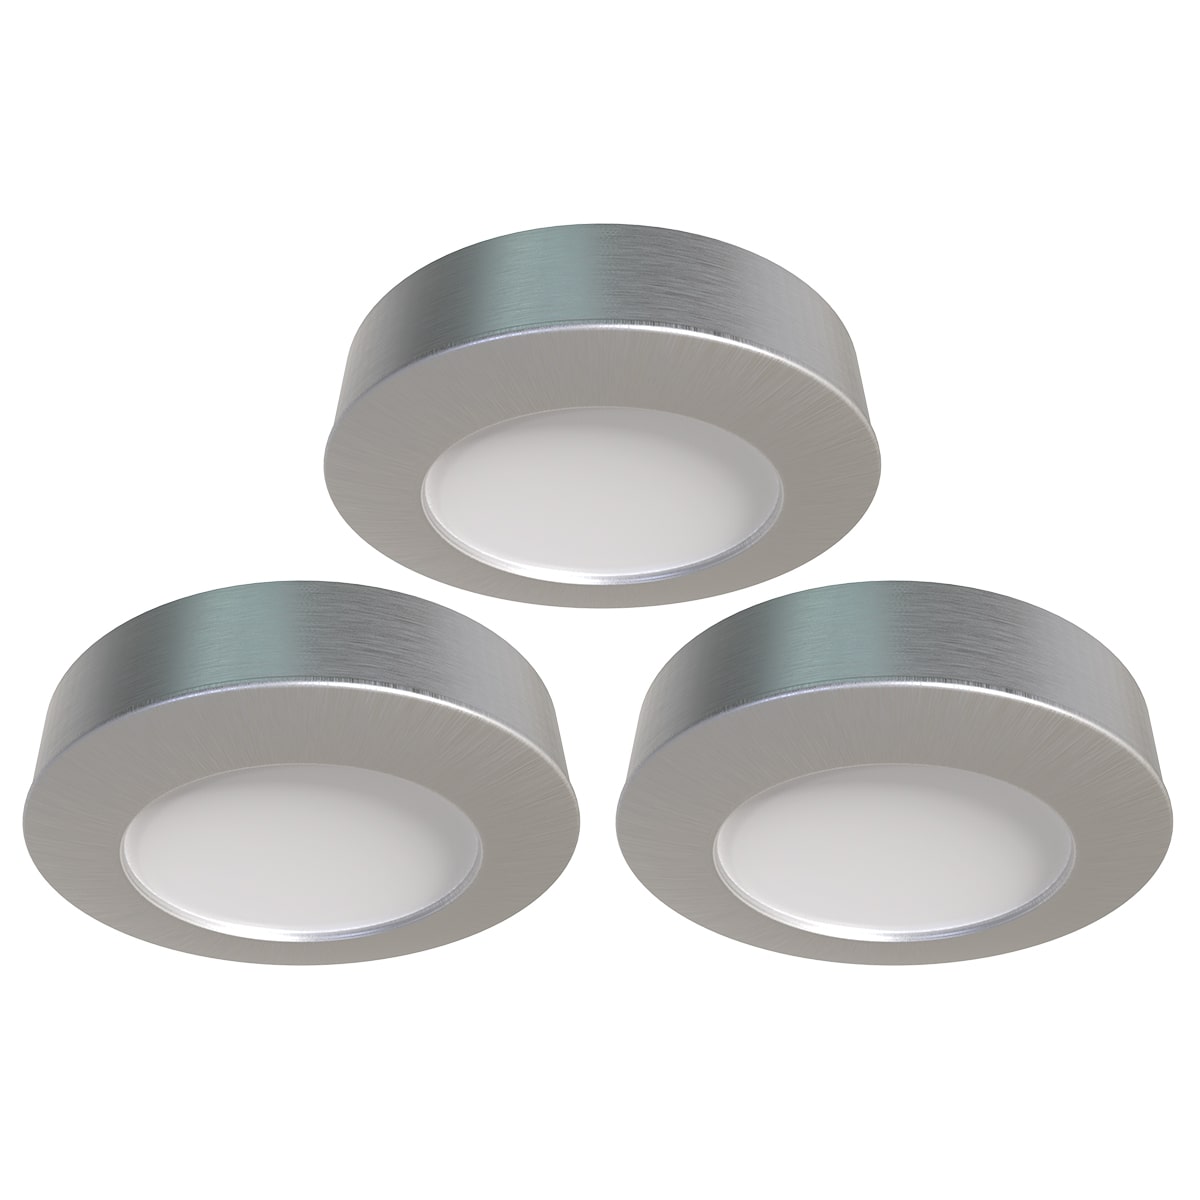 View 3 x 230v Brushed Chrome SurfaceRecessed Mounted UnderCabinet Lights information